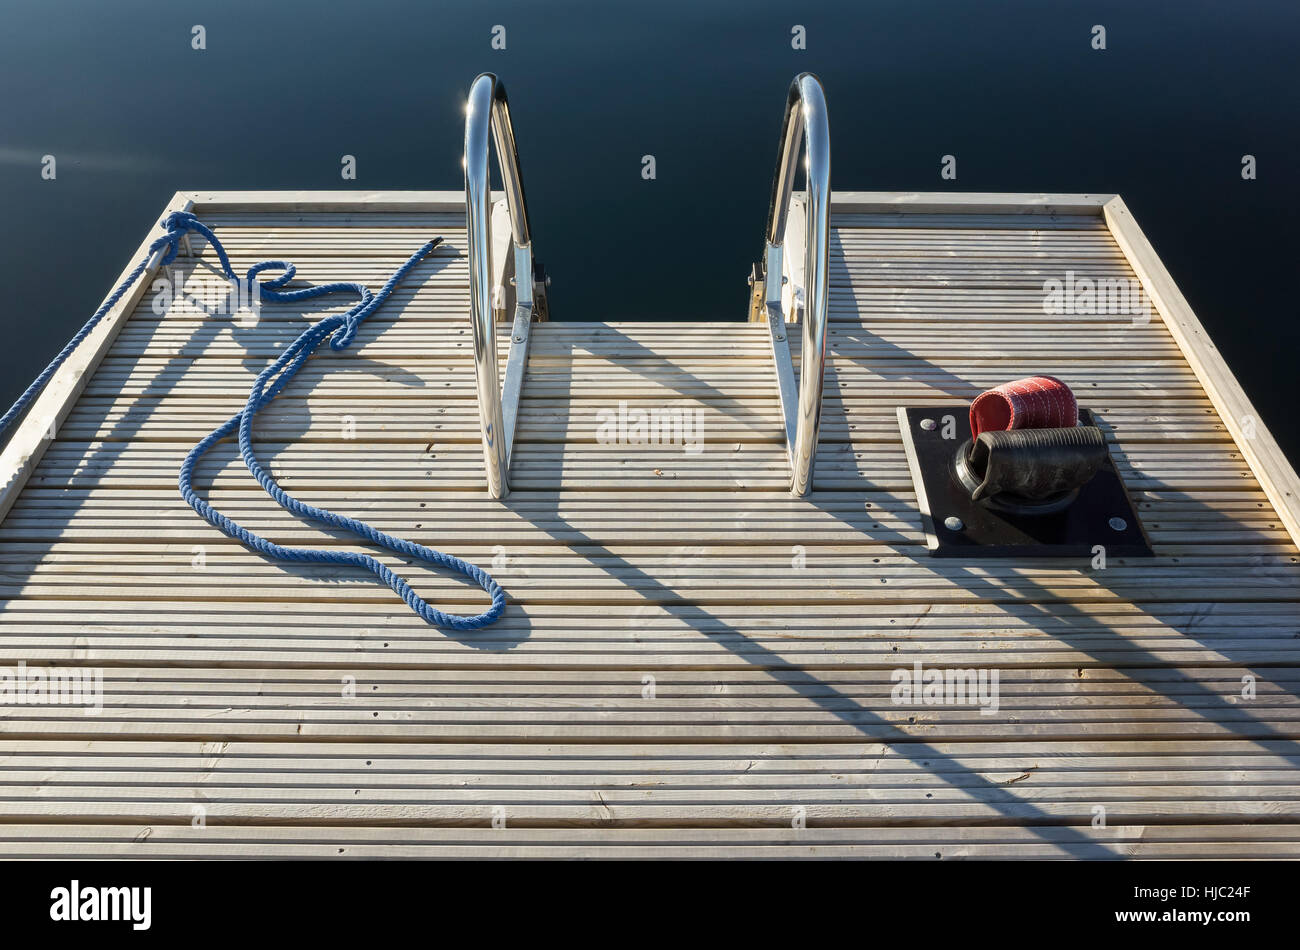 Small floating wooden marina pier with ropes and metal railings Stock Photo